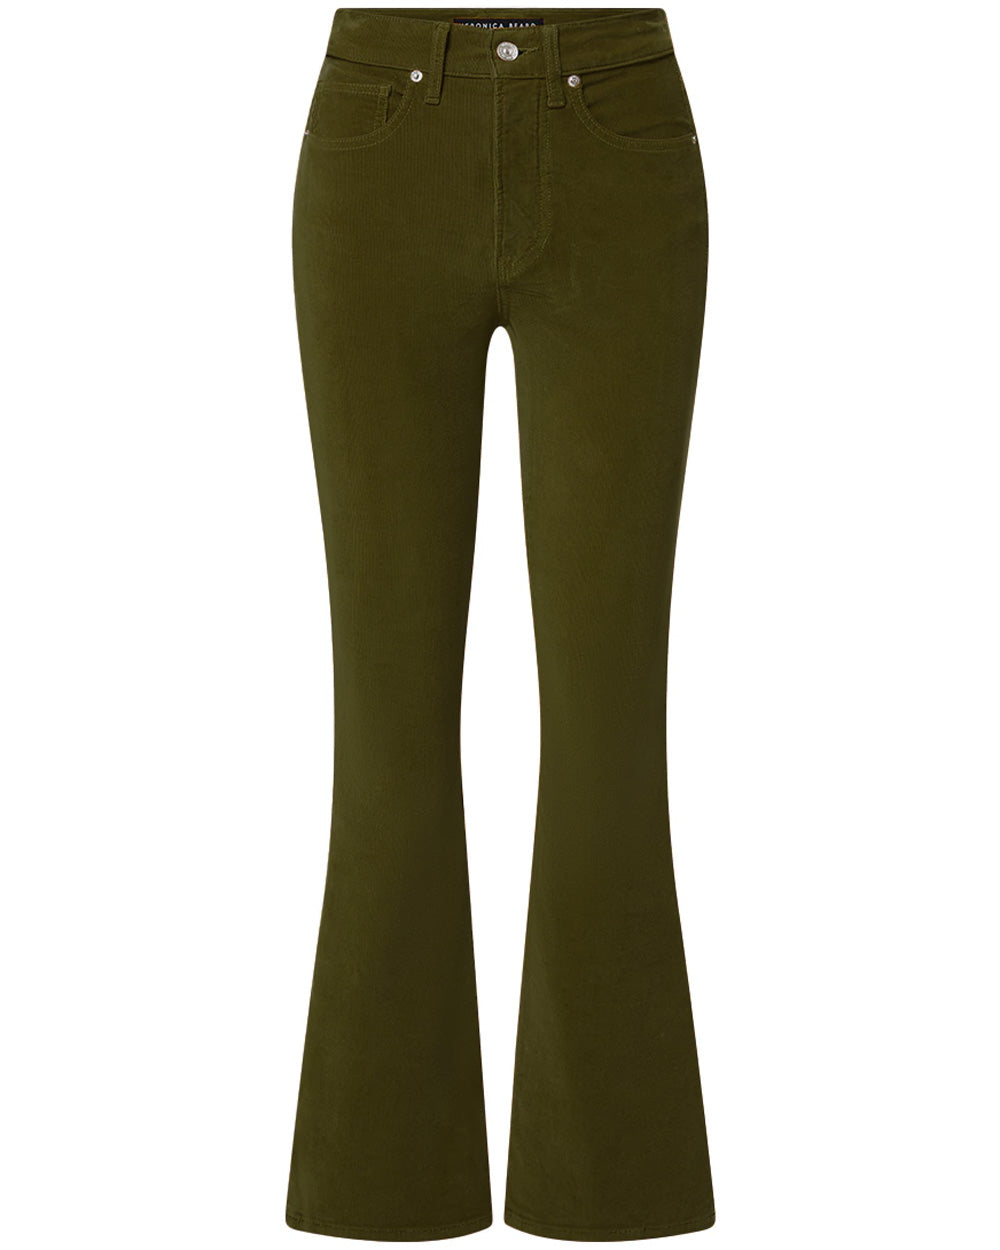 Carson High Rise Ankle Flare Pant in Army Green Corduroy